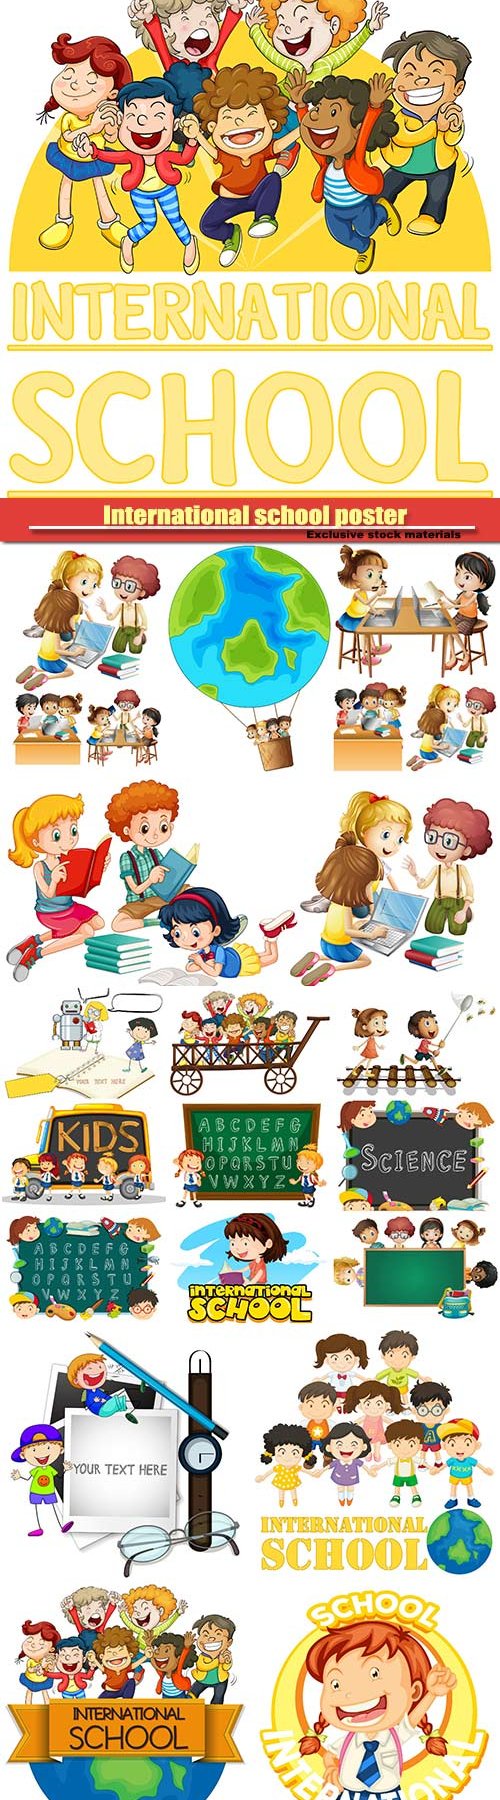 Frame template with boy and girl, international school poster with many children